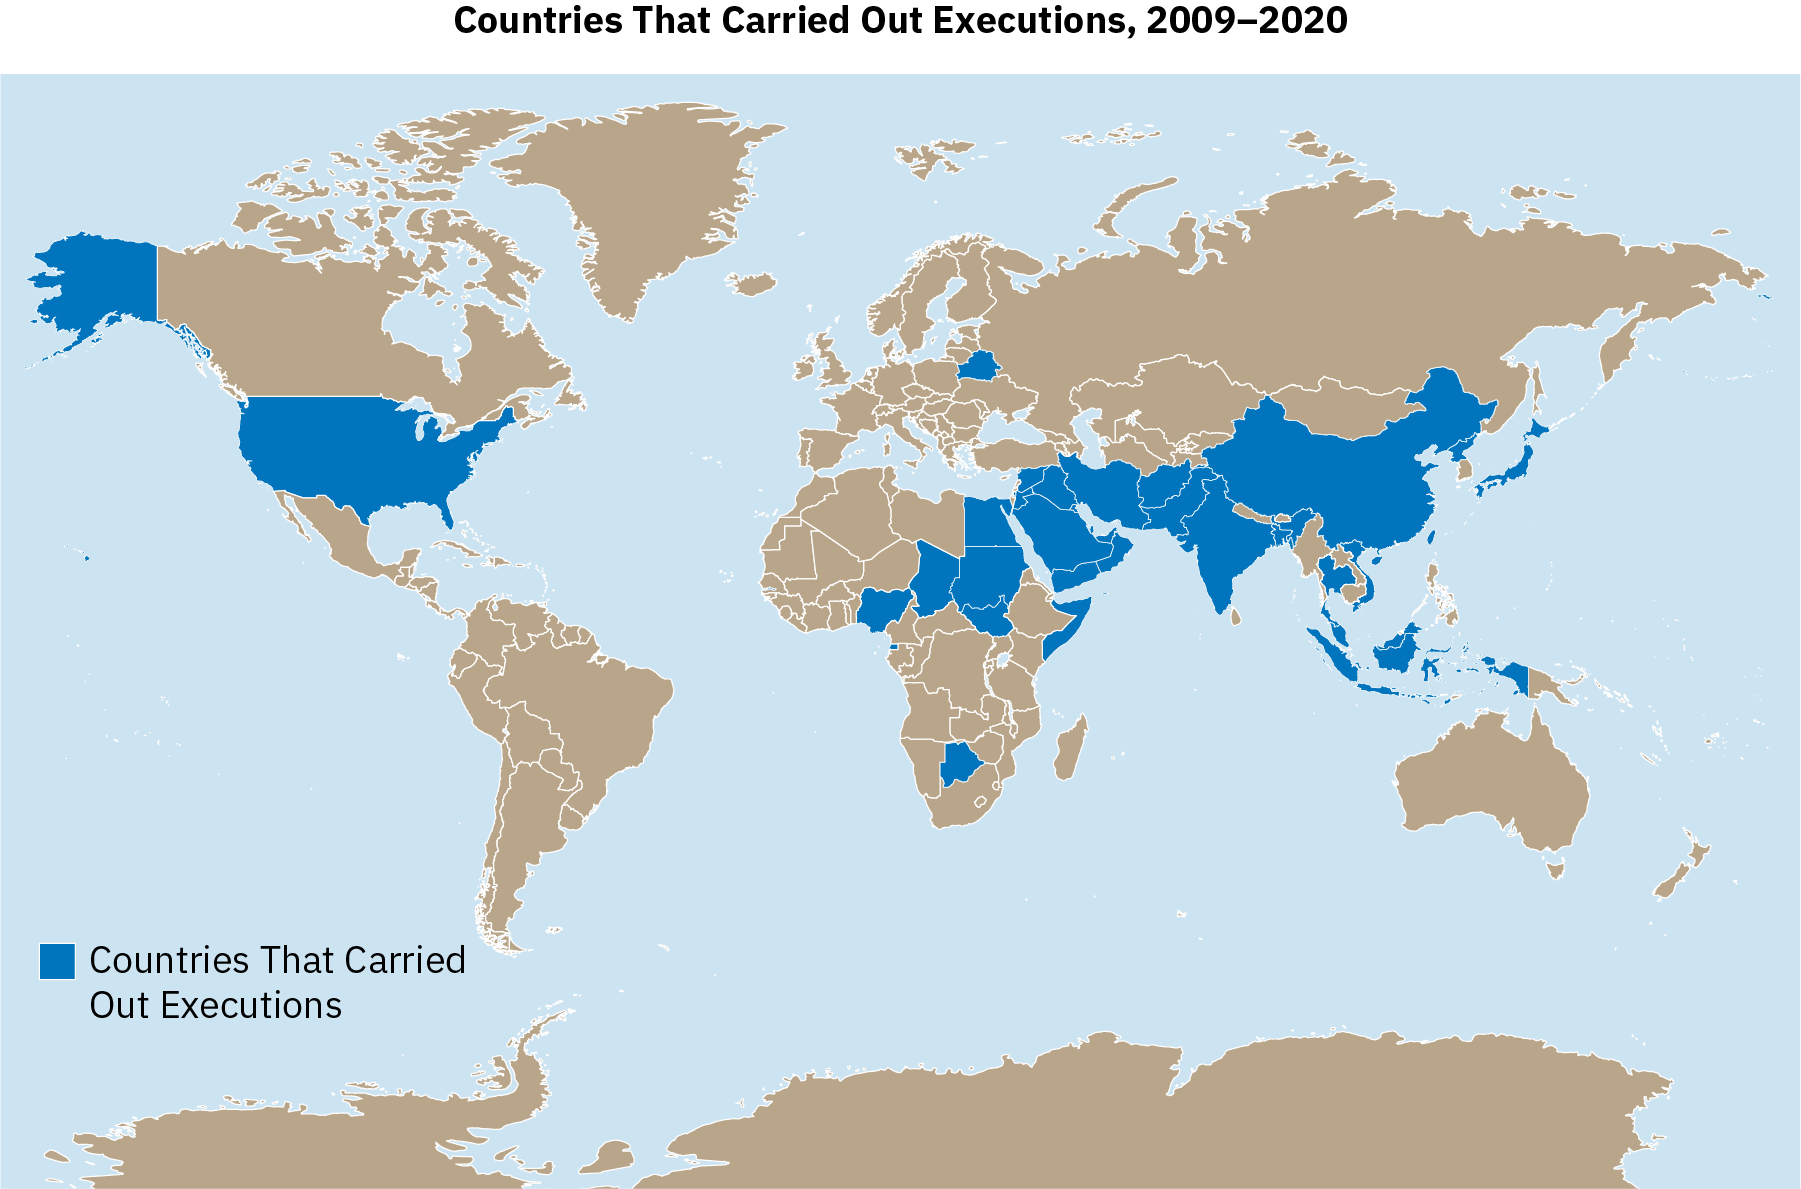 A world map shows all of the countries that carried out executions between 2009 and 2020. Most countries did not carry out executions during this timeframe.